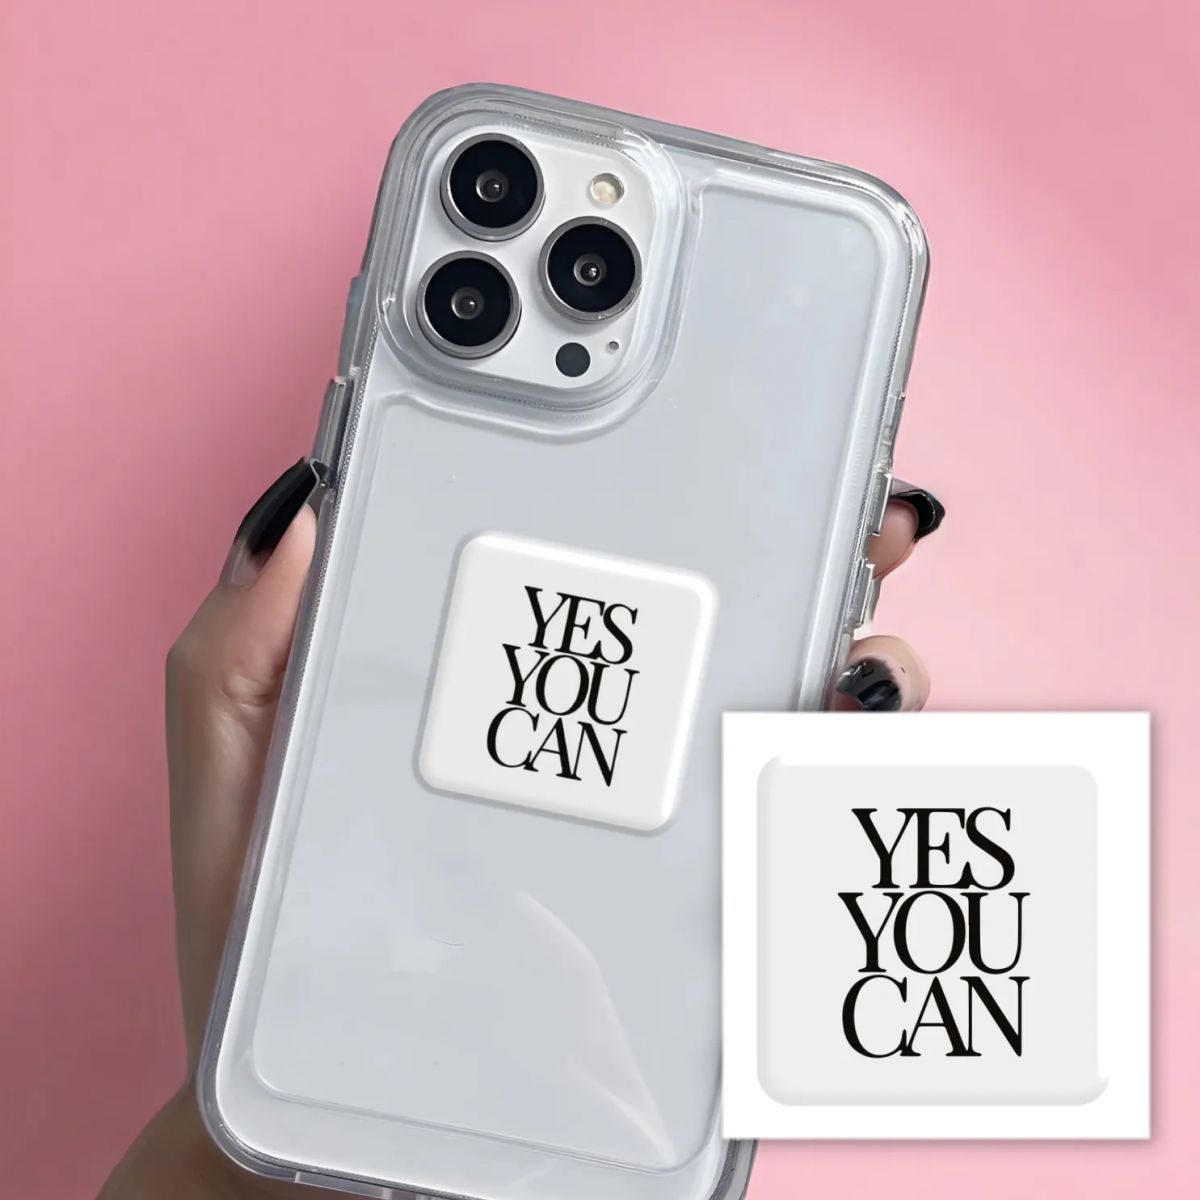 3D стікер "Yes, you can" (ціна за 1 шт)